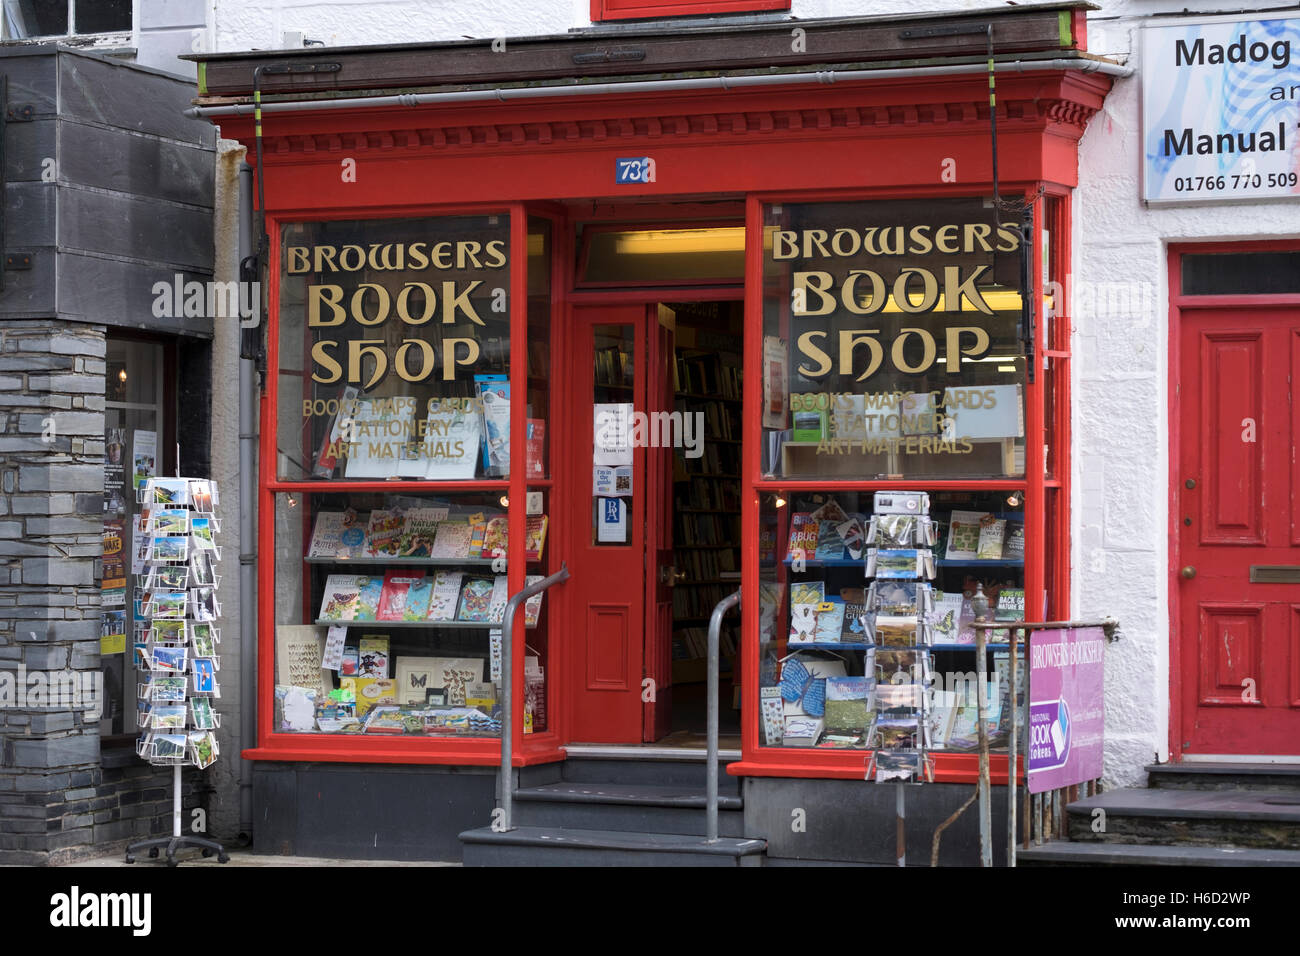 Browser's Book Shop Stock Photo